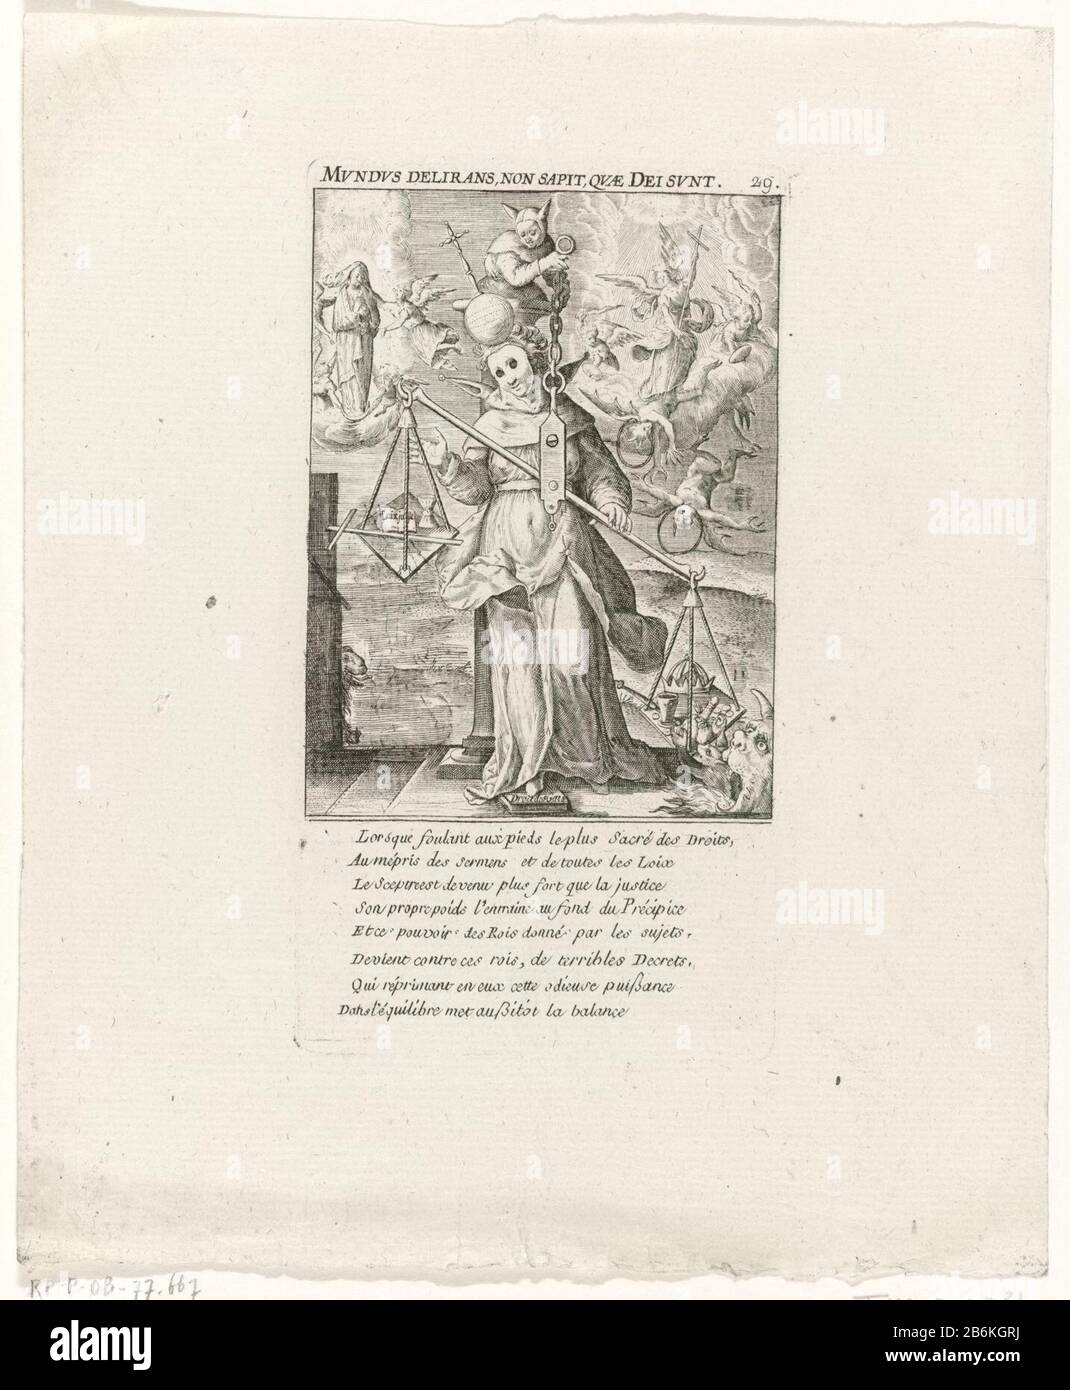 Folly worldly goods Mundus deli rans, non sapit, quae Dei sunt (title object) Brabant Revolution, 1787-1790 (series title) Allegory with masked woman in motley world. On her head is a fool with scales Where: in worldly goods outweigh a crucifix and a code. Left pursues a soul to heaven, pouring right devils in hell. Numbered top right: 29. In verse eight lines in French under the performance. Part of a large group of pictures related to the events of the Brabant Revolution and the period 1787-1790. Manufacturer : printmaker: anonymous place manufacture: Southern Netherlands Date: 1575 to 1599 Stock Photo